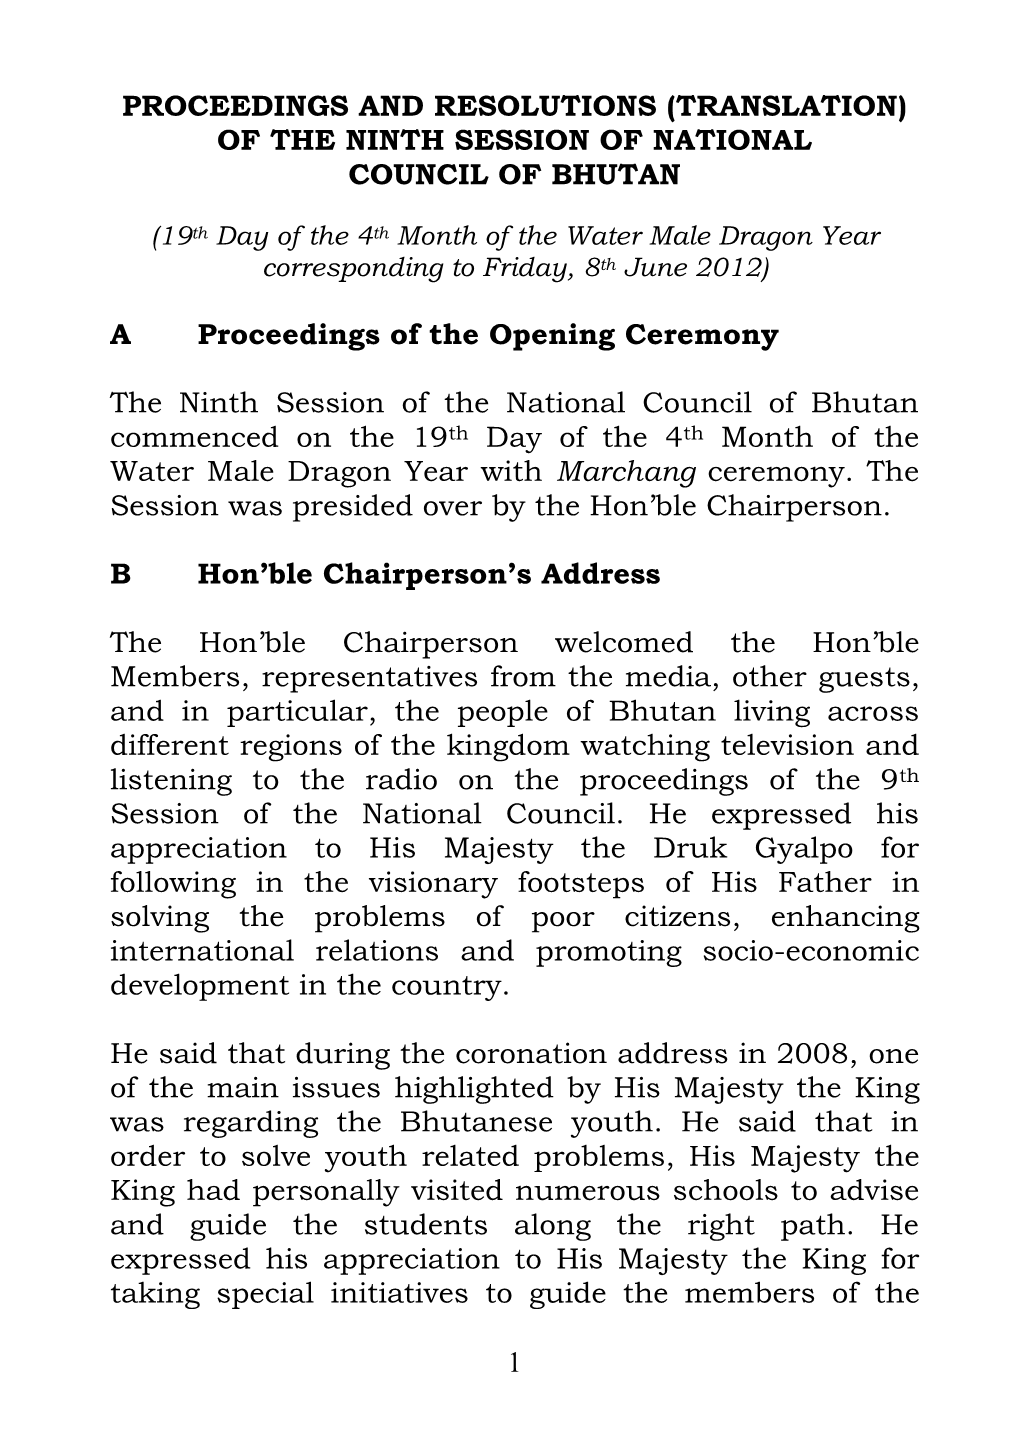 1 PROCEEDINGS and RESOLUTIONS (TRANSLATION) of the NINTH SESSION of NATIONAL COUNCIL of BHUTAN a Proceedings of the Opening